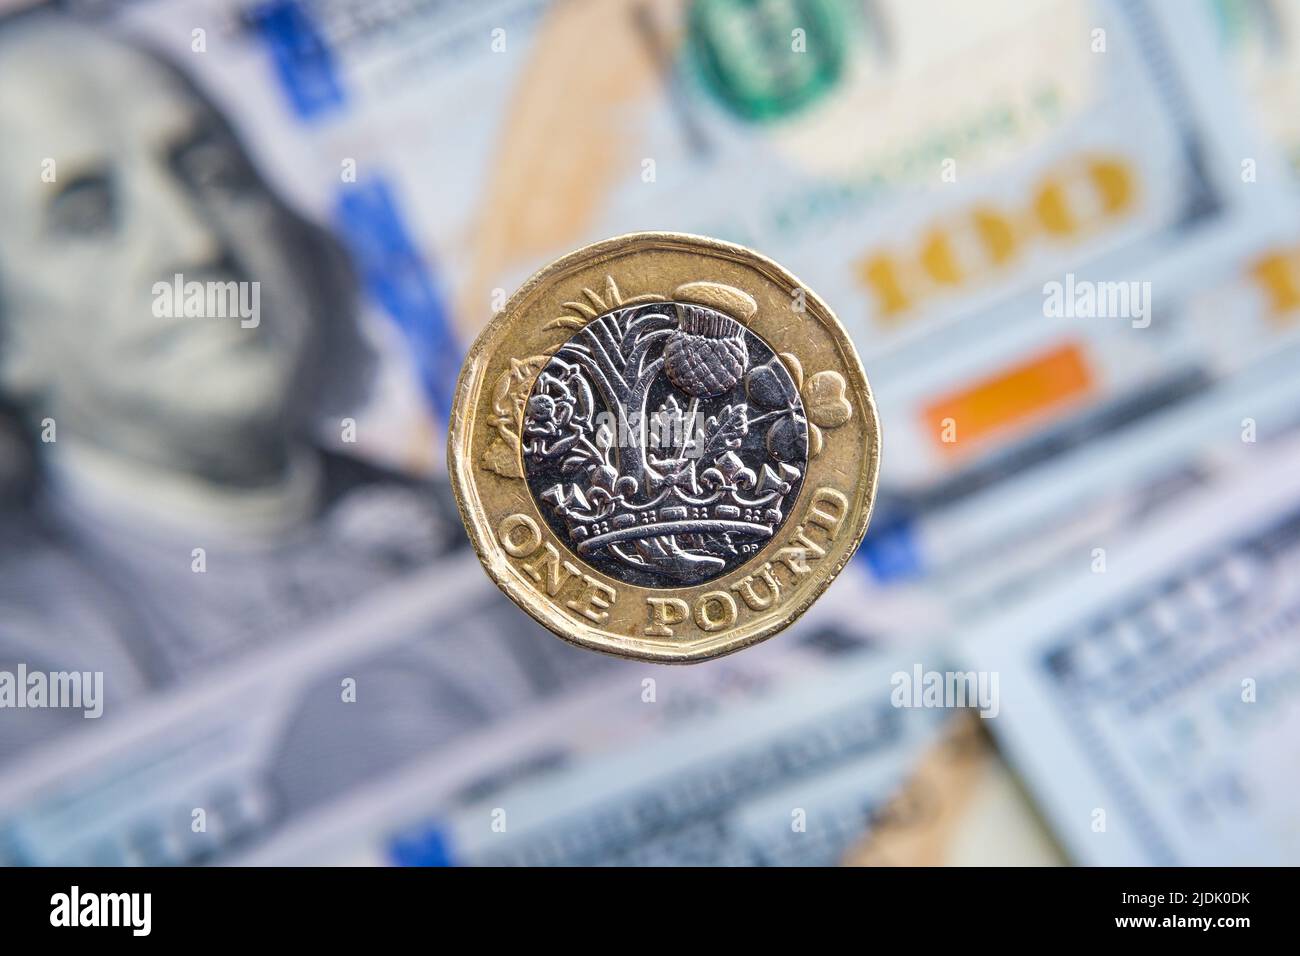 British one pound coin close up and blurred hunder dollar banknotes on the background. Concept for inflation. Not a montage, real photo. Stock Photo